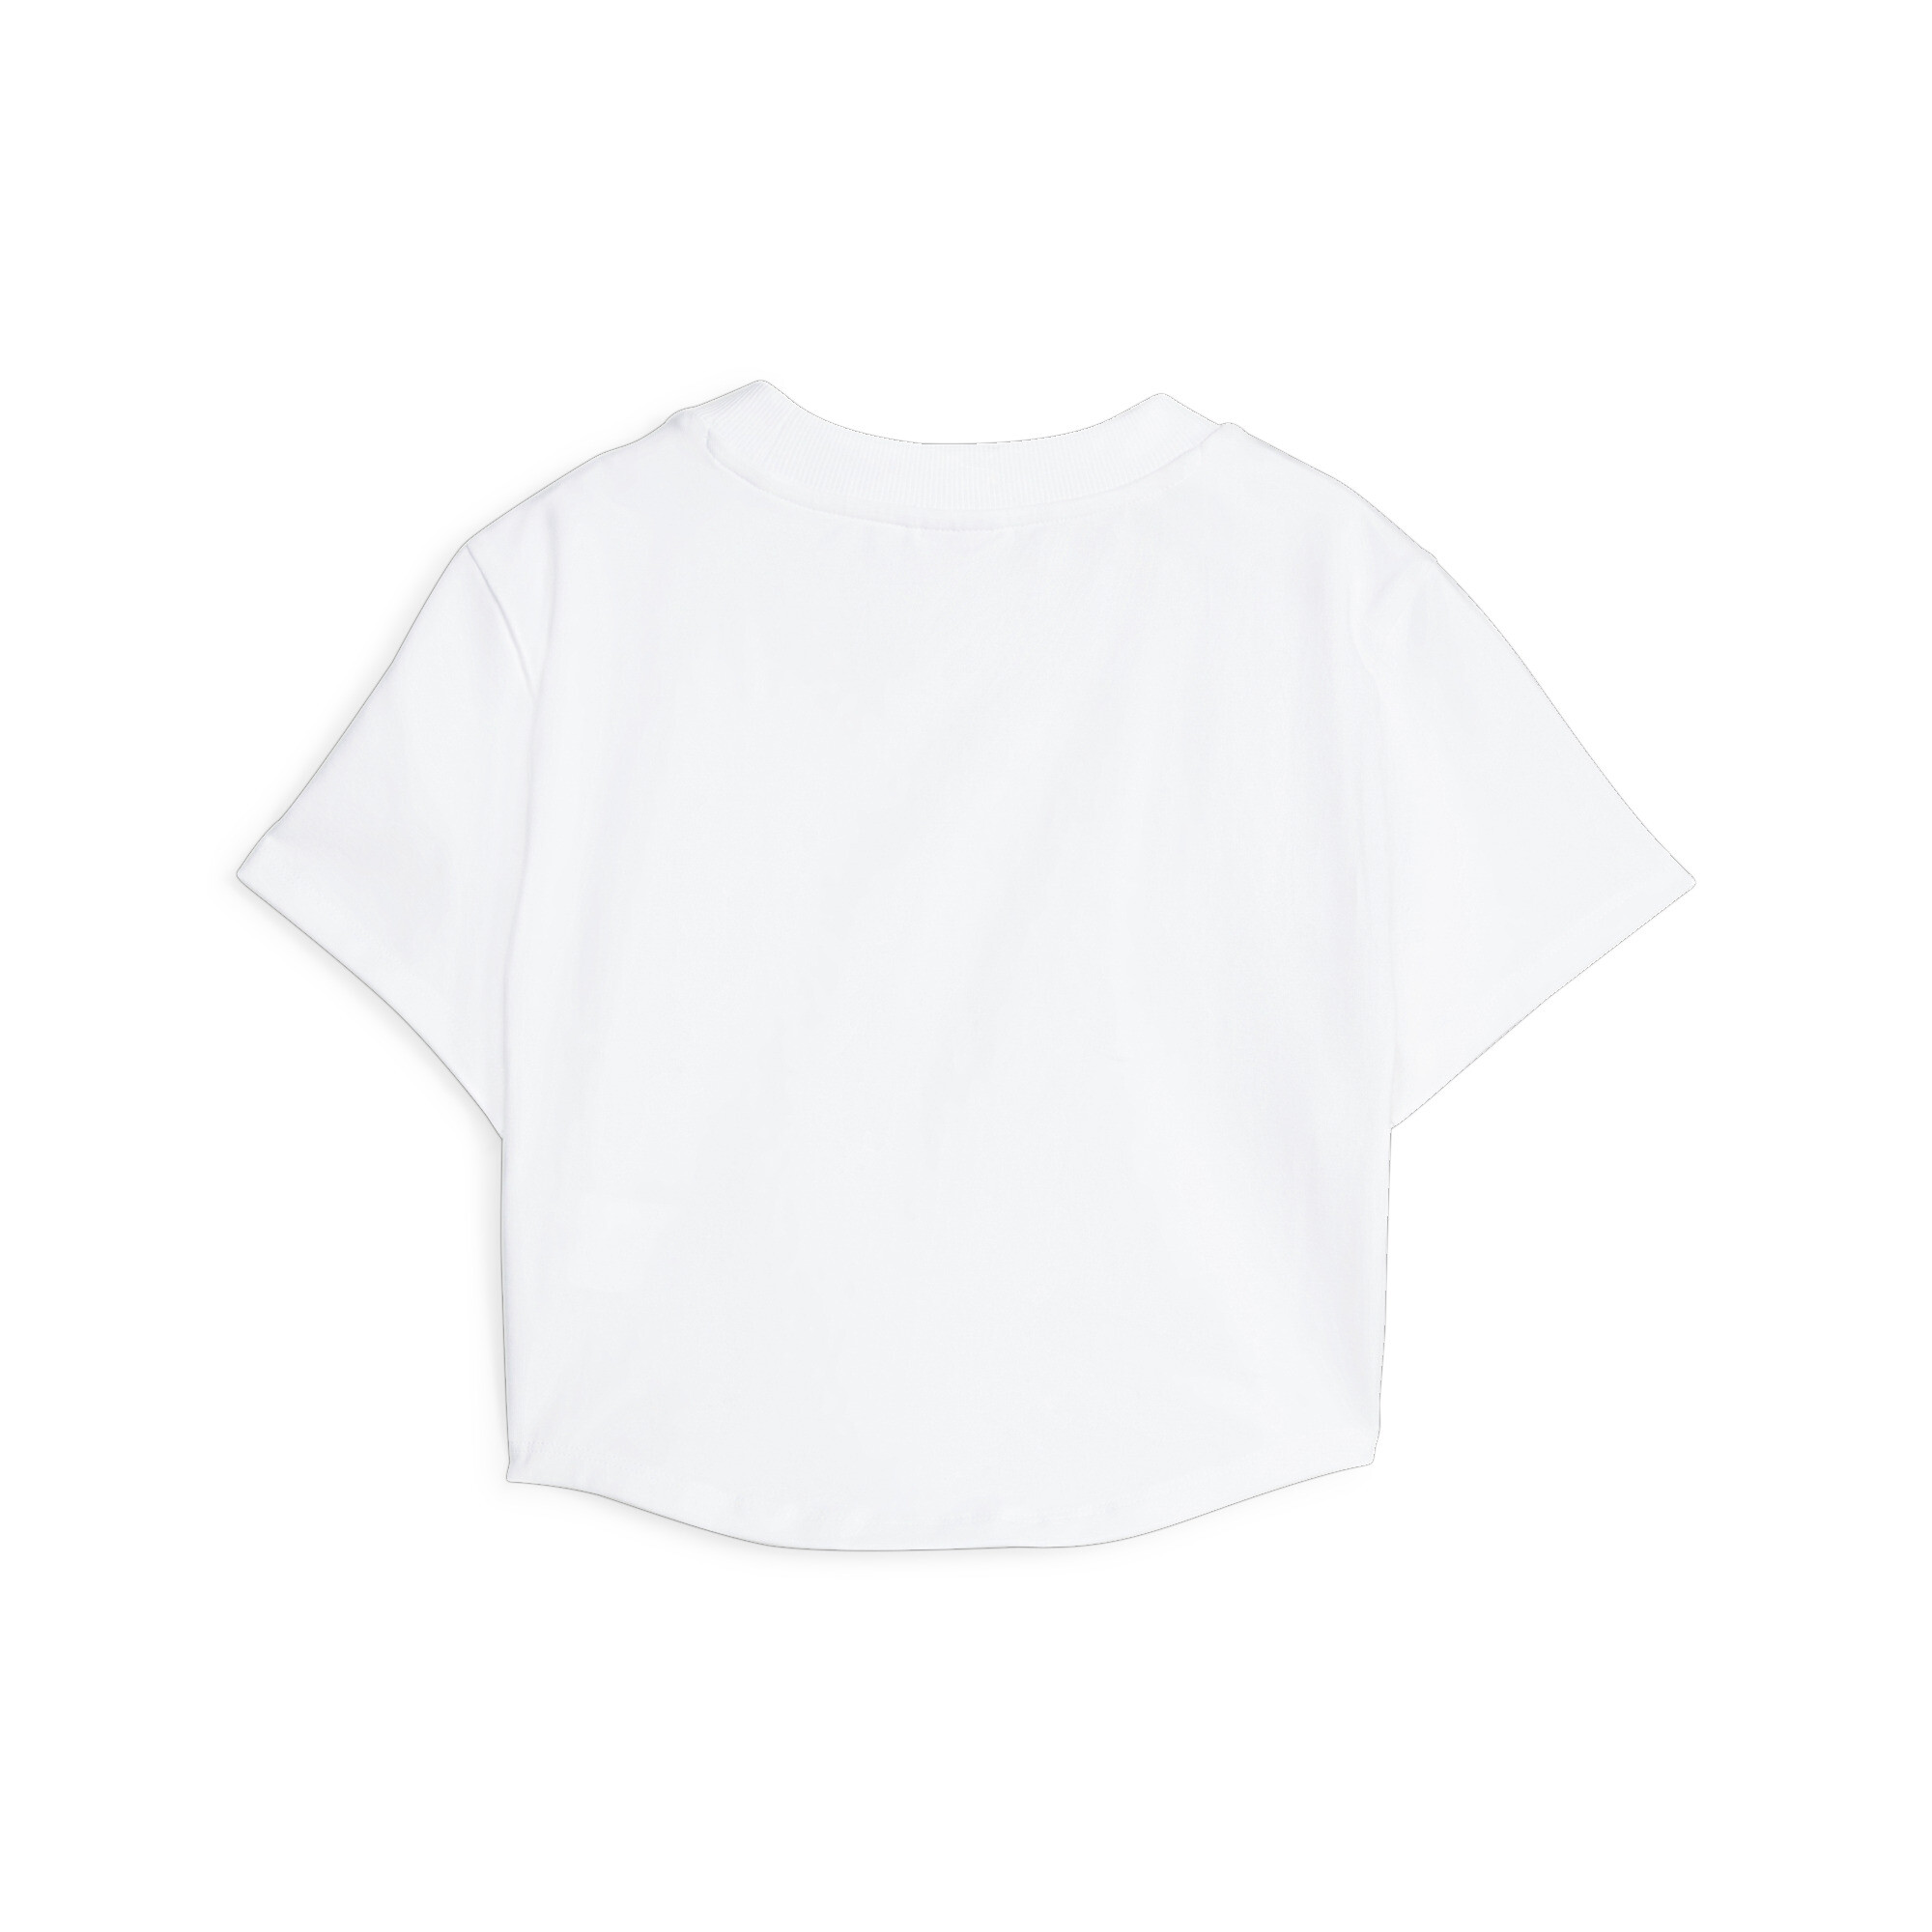 Women's PUMA DARE TO Cropped T-Shirt In White, Size Small